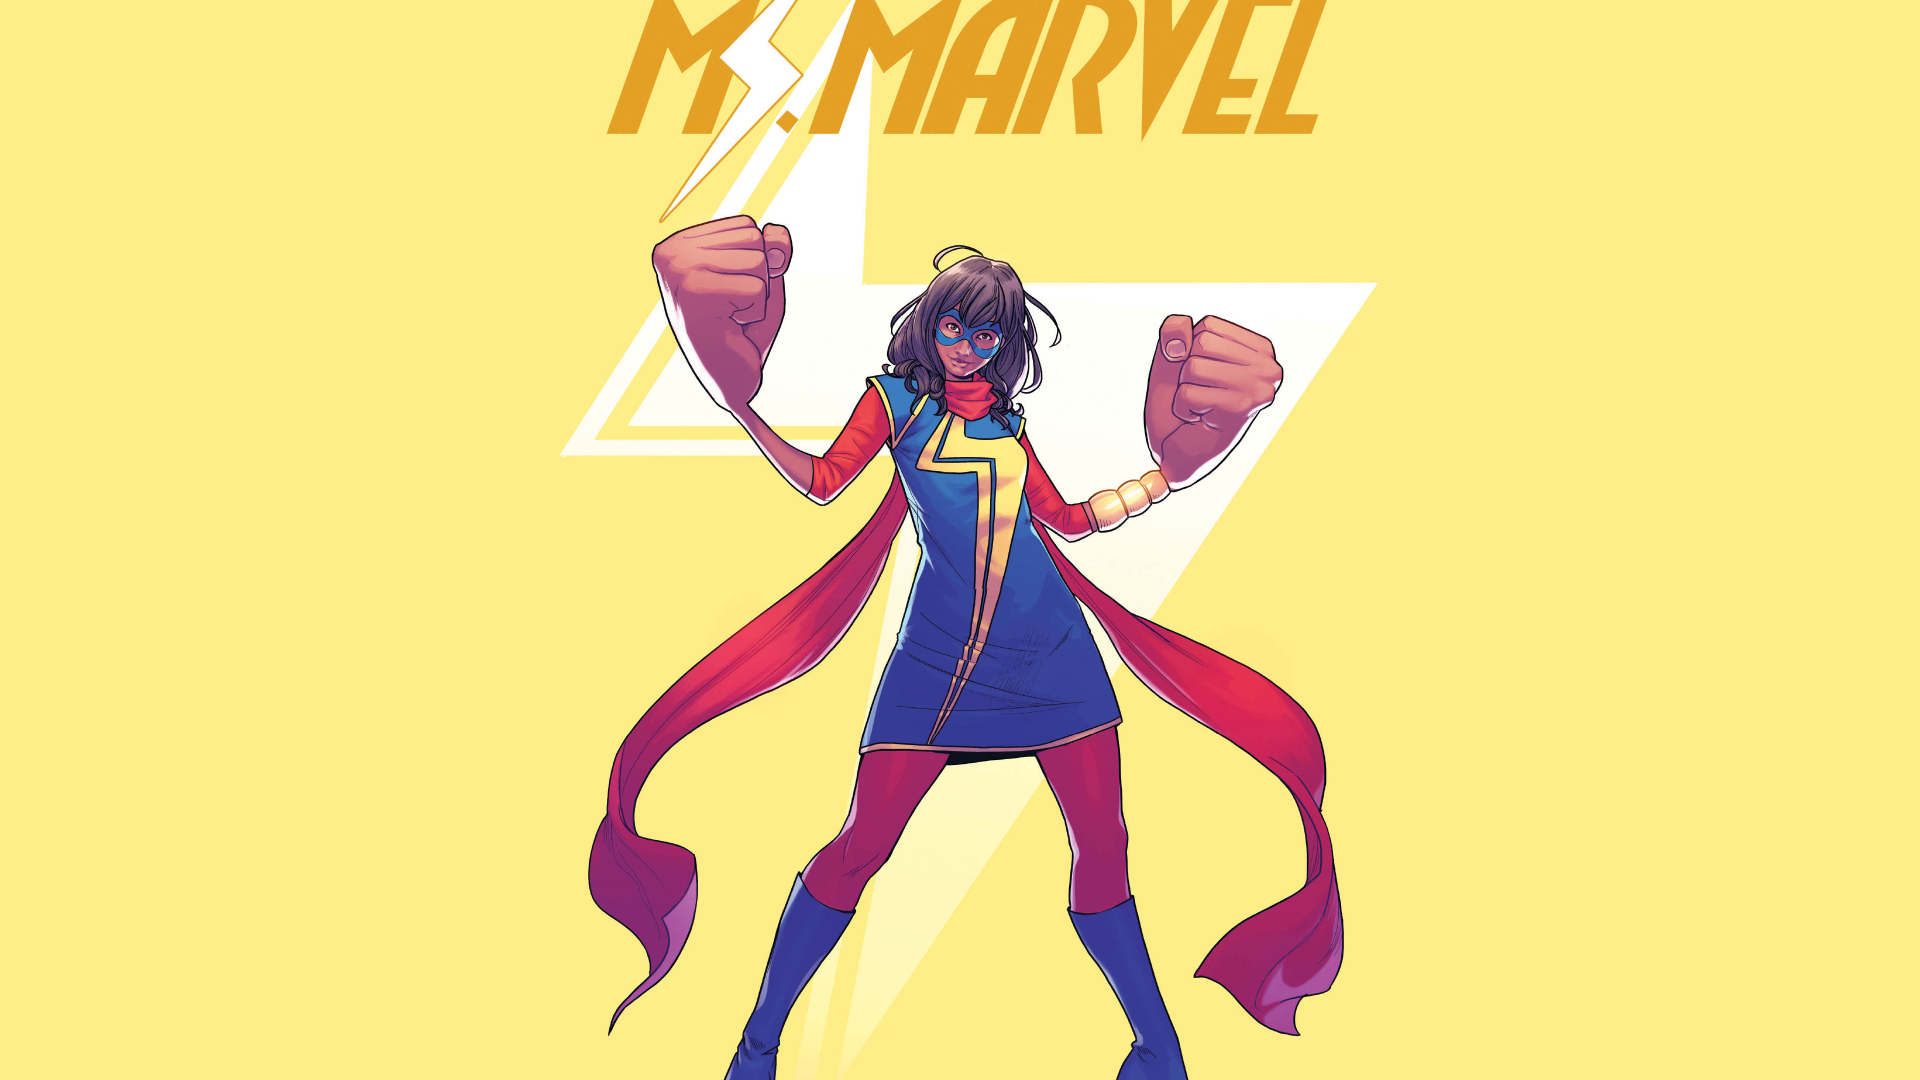 19x1080 Mcu Kamala Khan As Ms Marvel 1080p Laptop Full Hd Wallpaper Hd Superheroes 4k Wallpapers Images Photos And Background